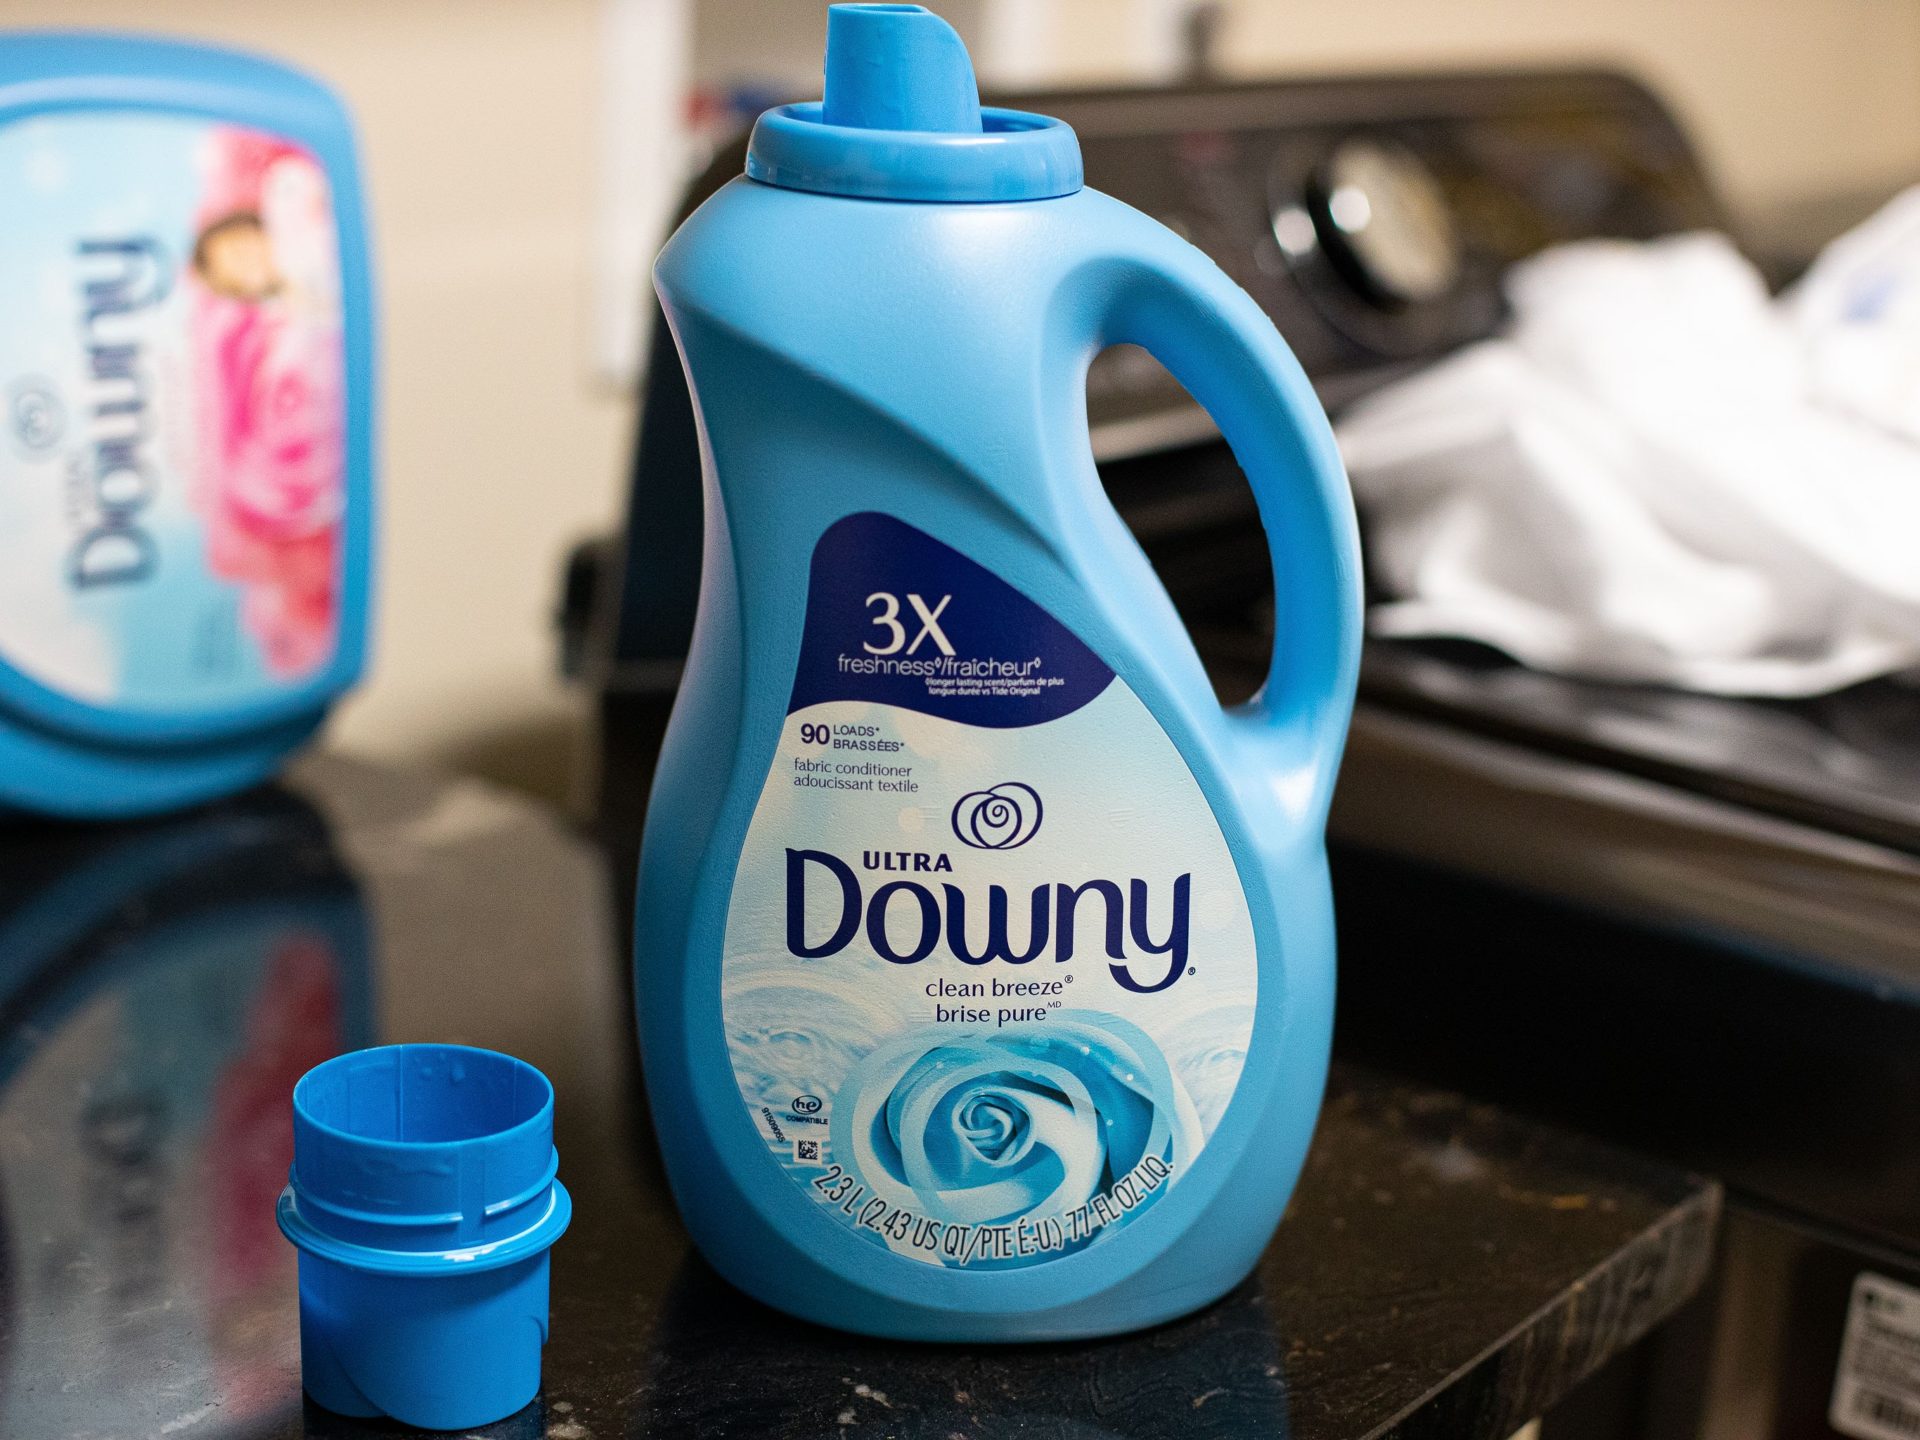 Downy Fabric Softener As Low As $3.99 At Kroger